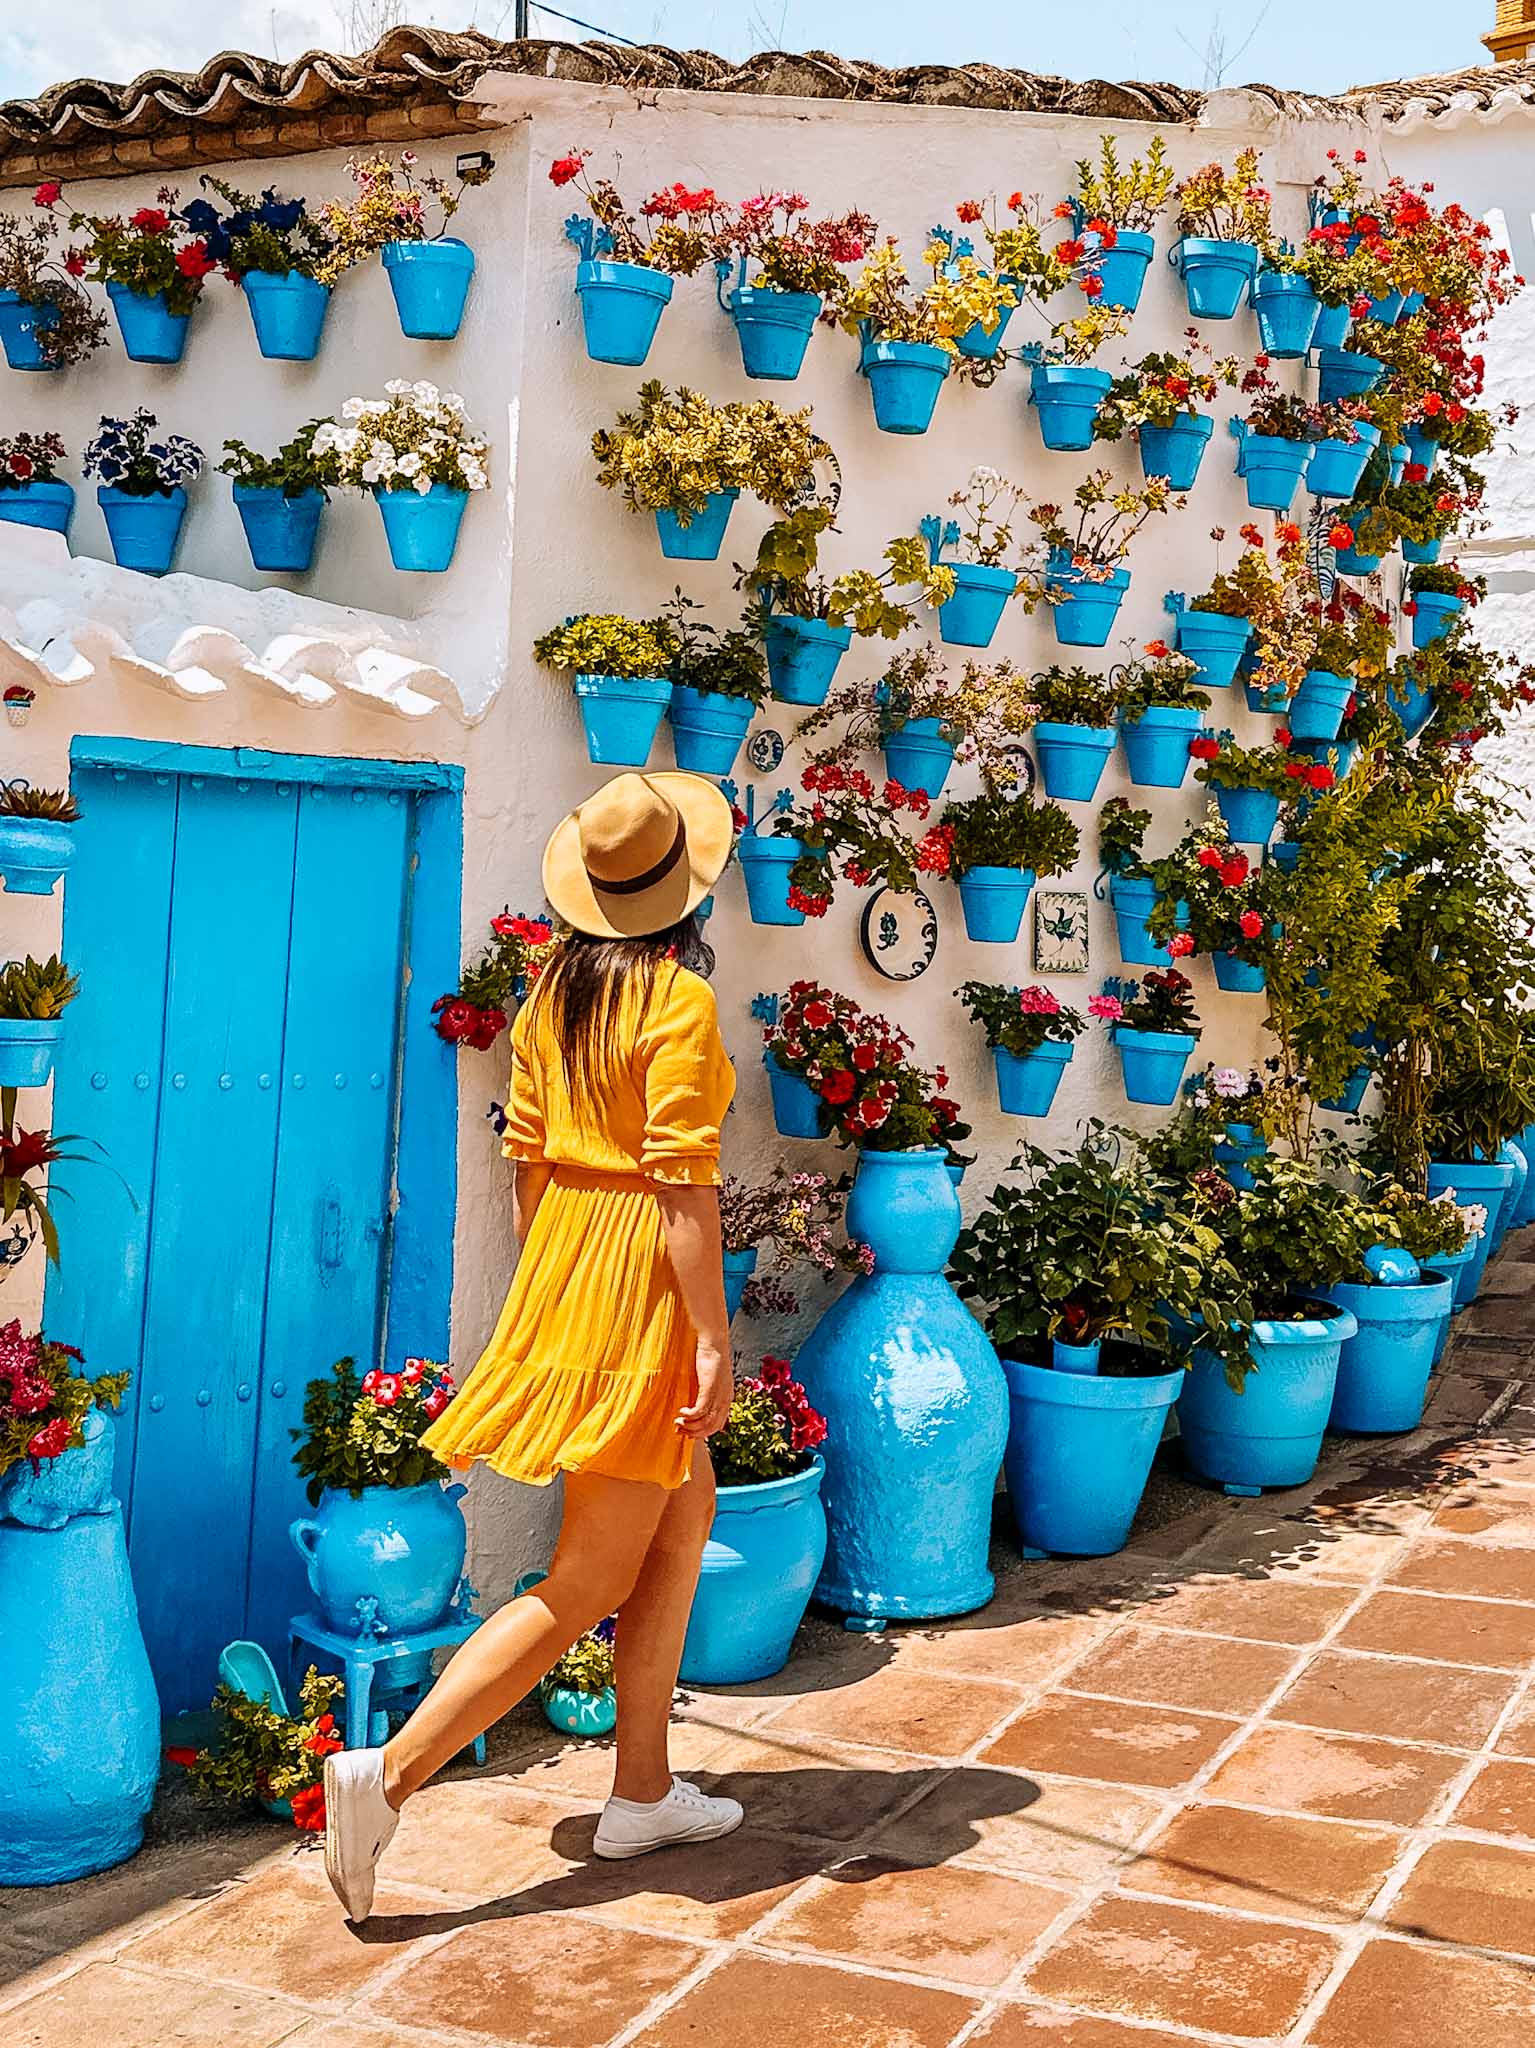 Iznajar village, Cordoba - things to do in the hidden flower village in the mountains of Andalusia, Spain